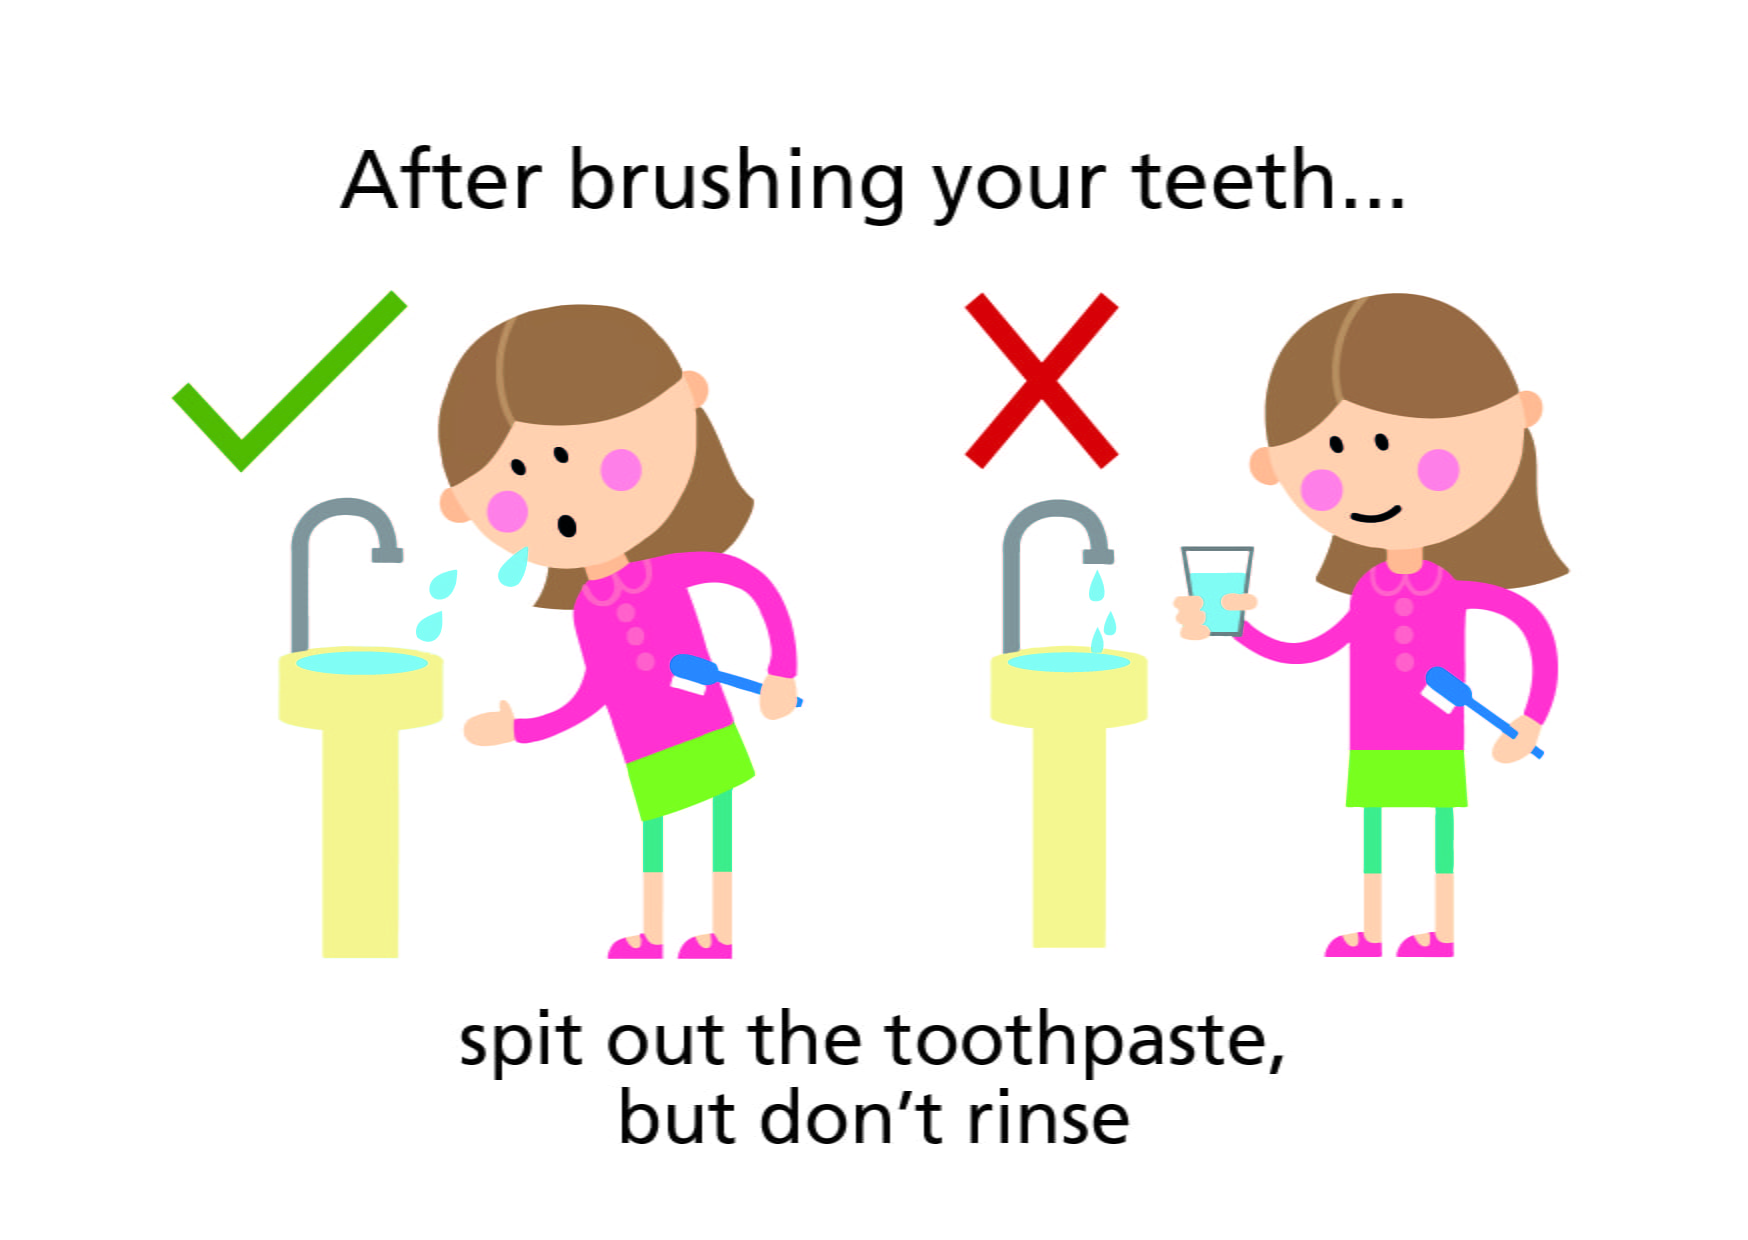 Spit your toothpaste, don't rinse